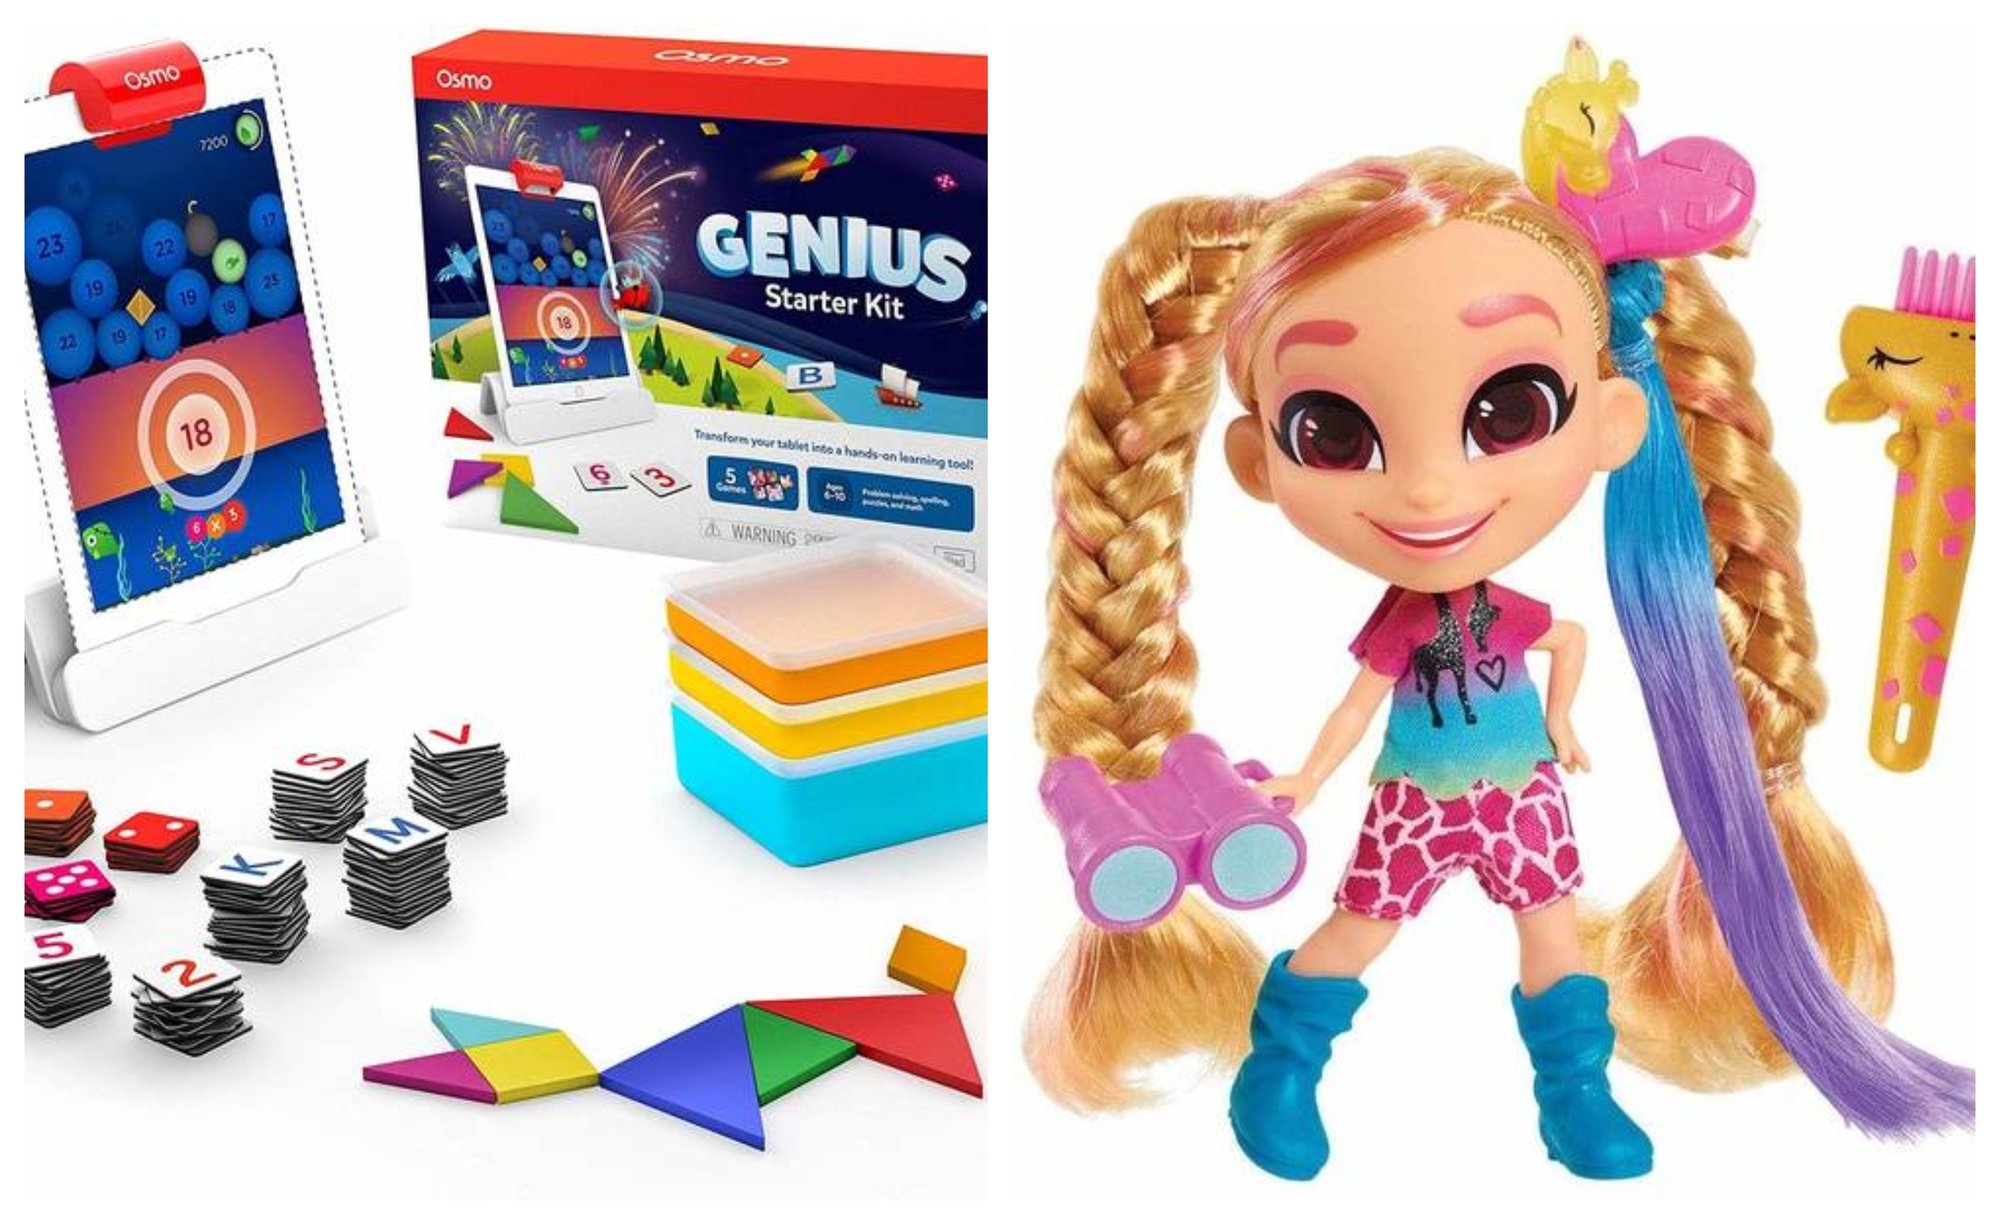 2019 Amazon Holiday Toy List: The 